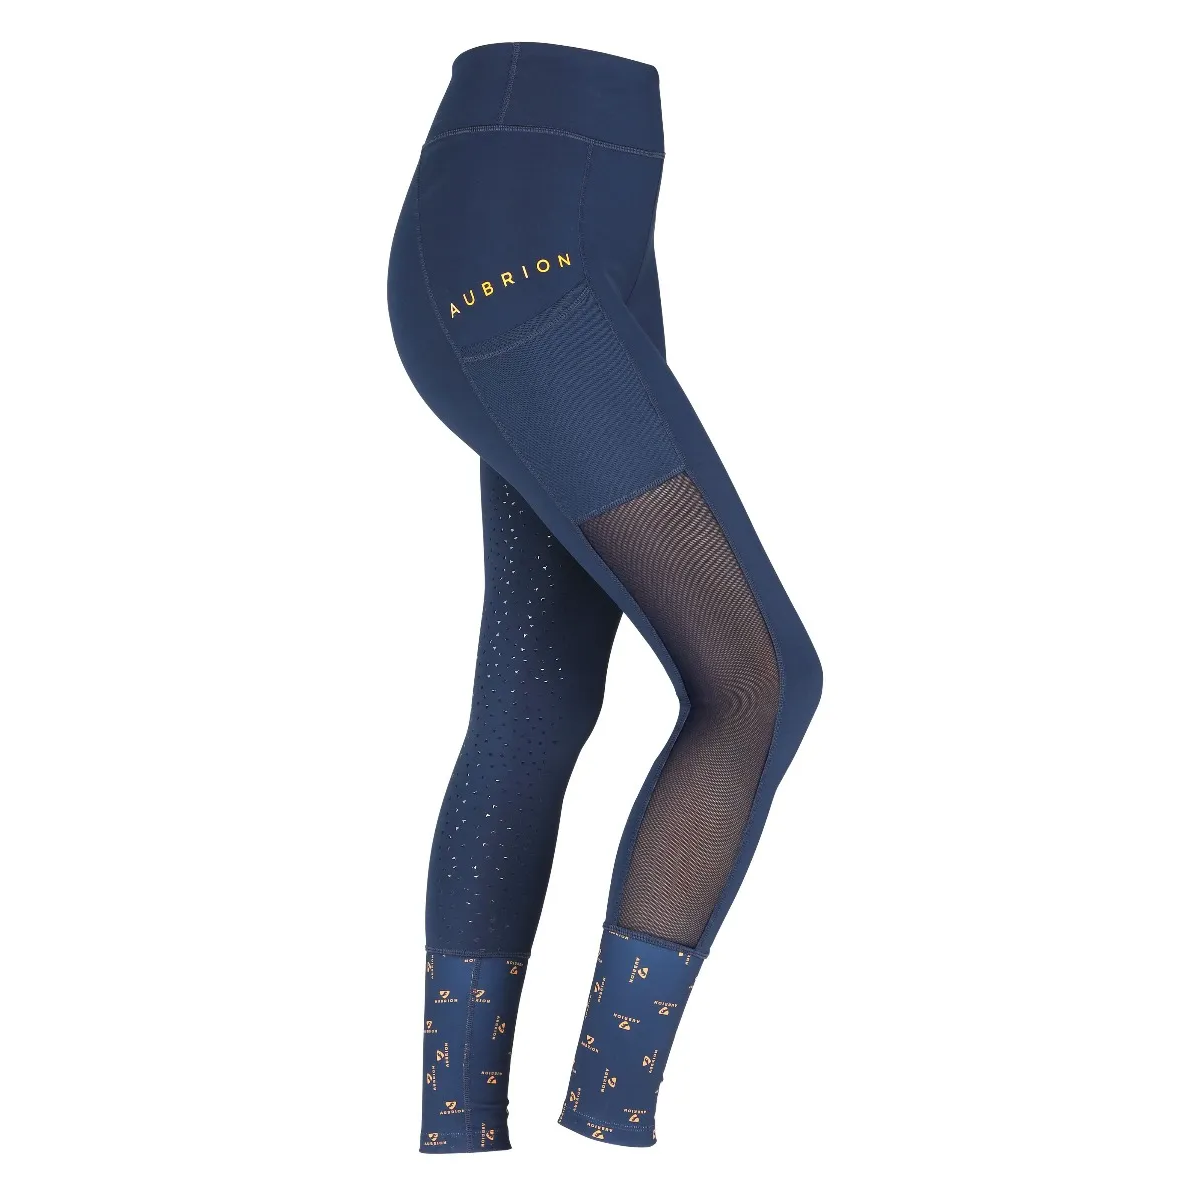 SHIRES 8312 AUBRION ELSTREE RIDING TIGHTS MAIDS NAVY